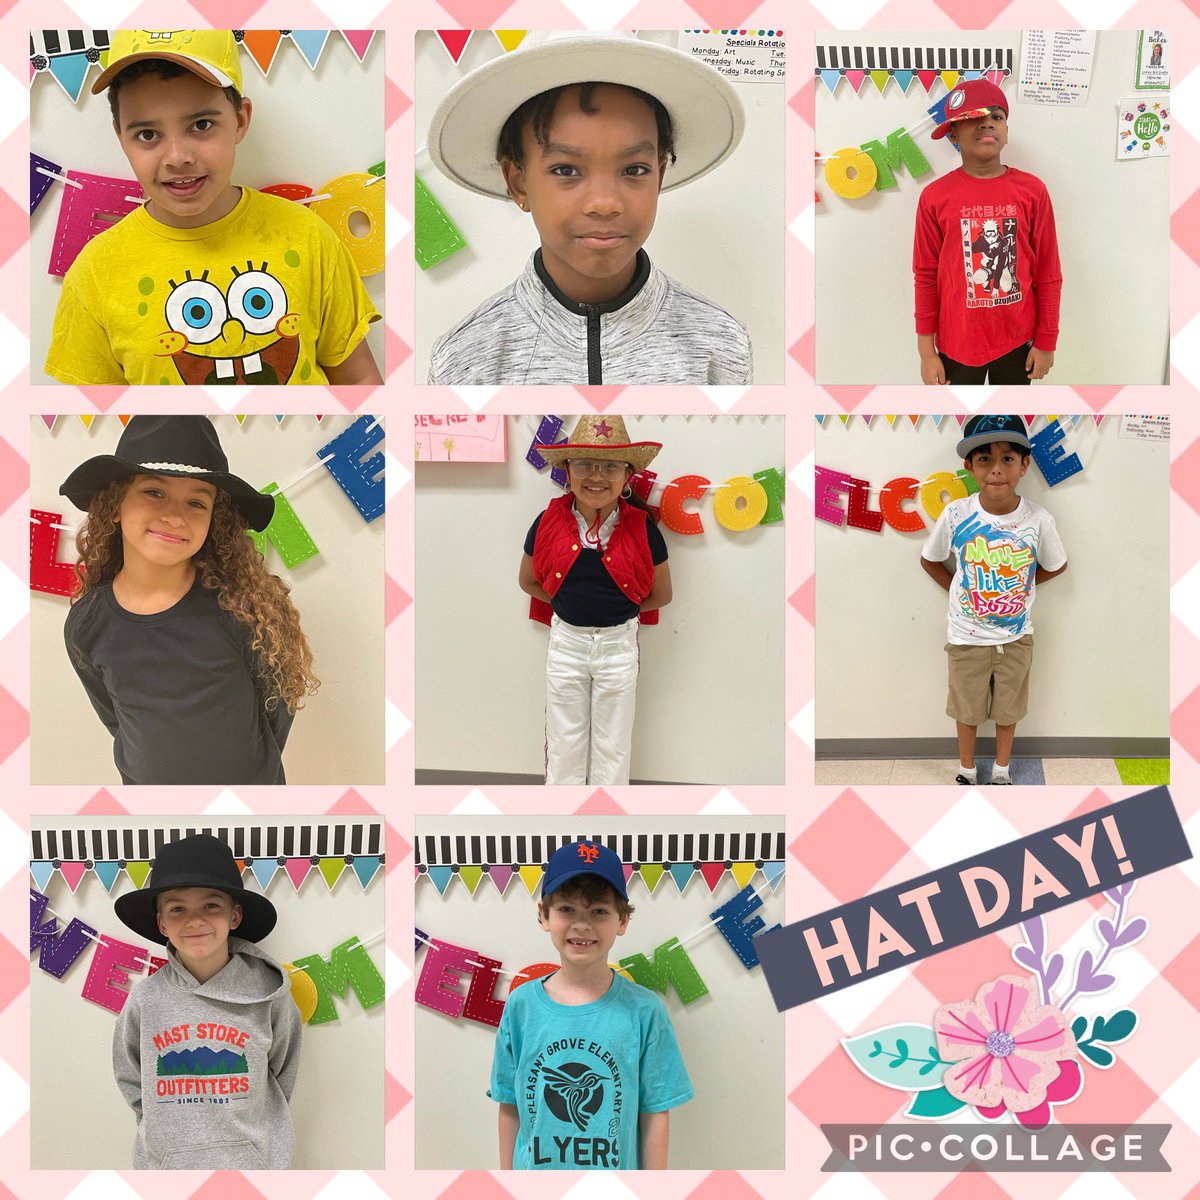 We have hats of all shapes and sizes! Spring break …here we come!#flyerspirit @pgesflyers